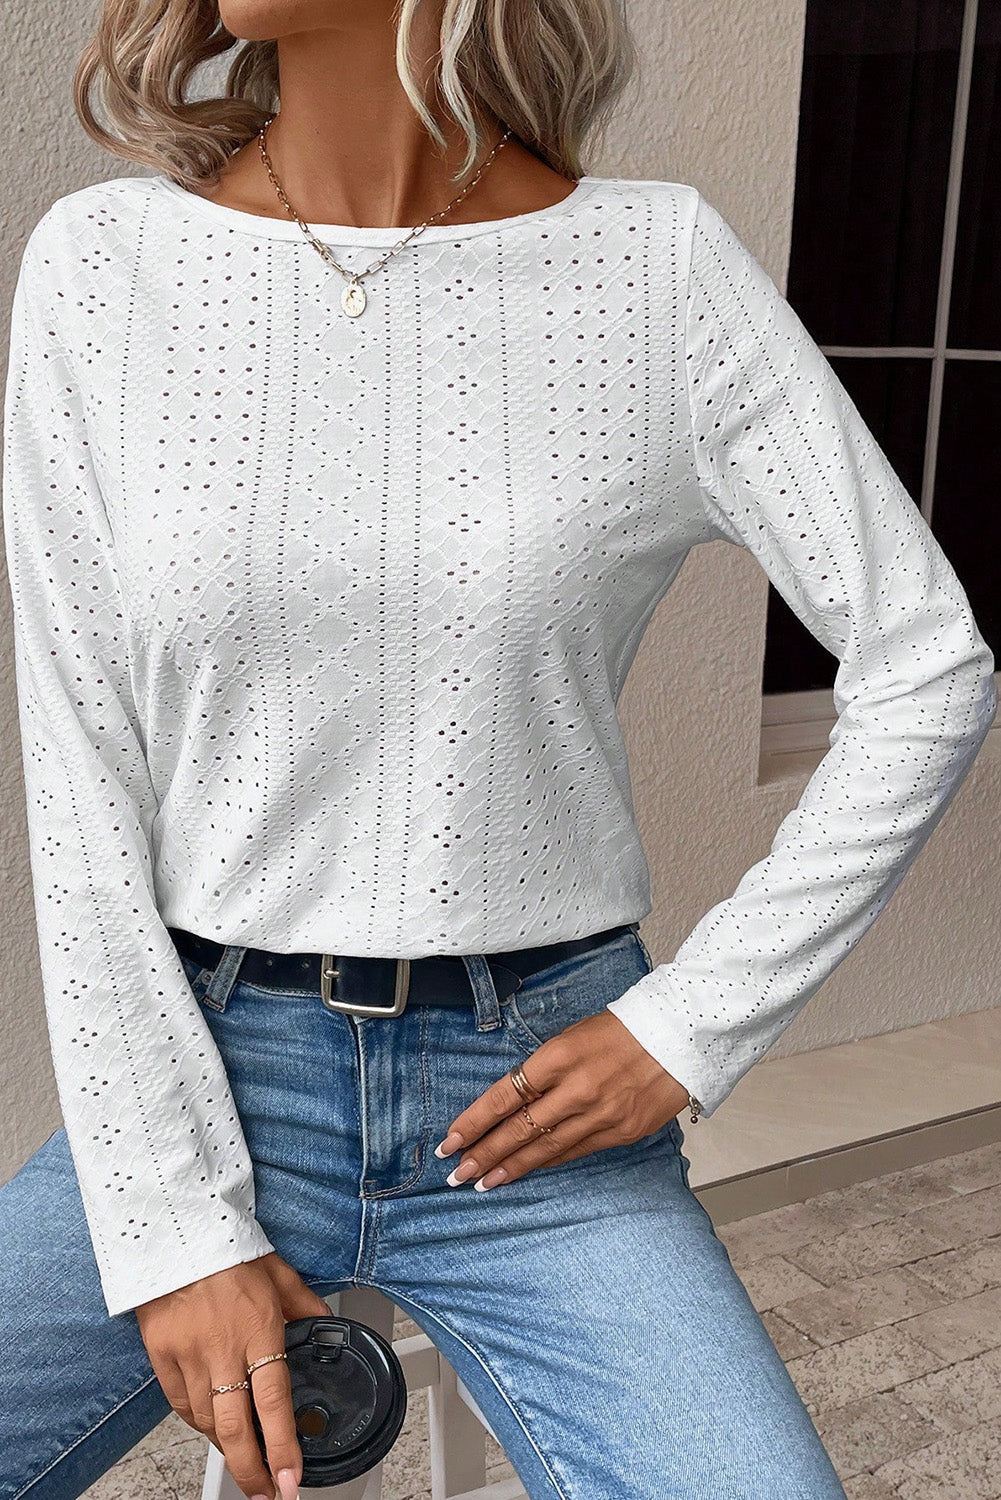 White Floral Lace Splicing Eyelet Long Sleeve Top